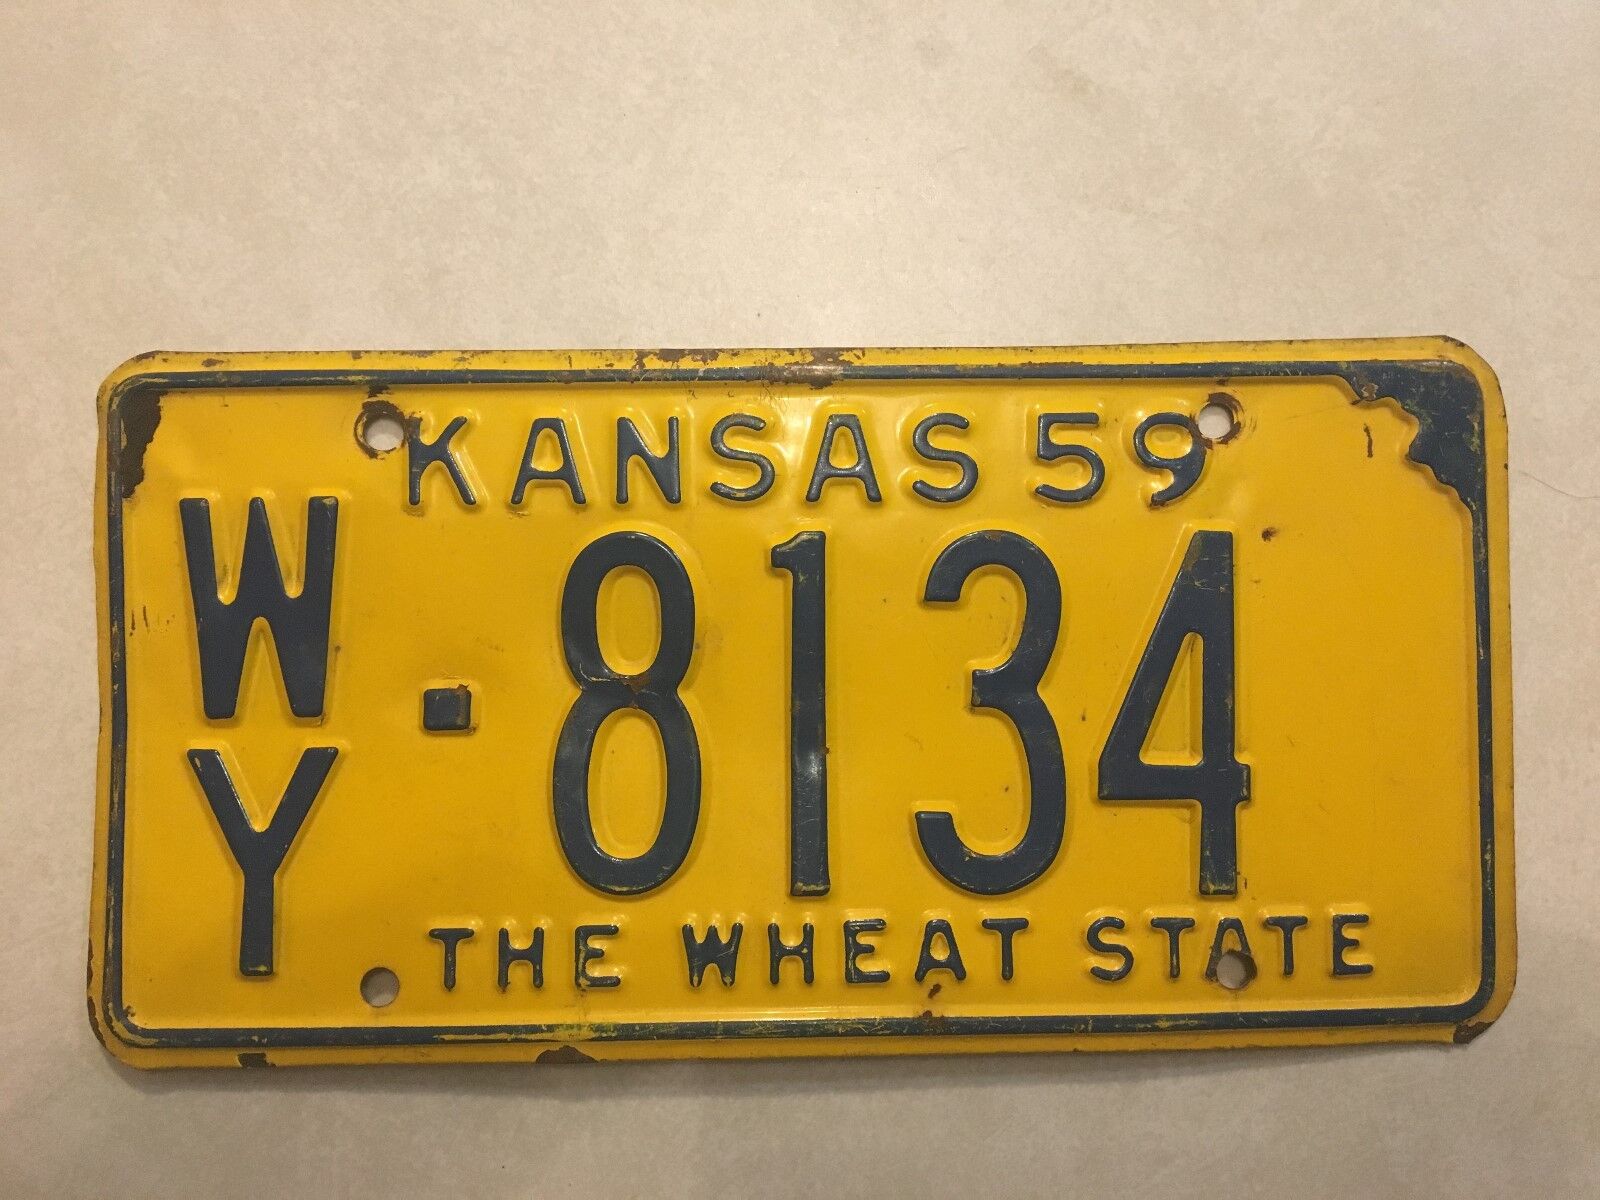 GOOD SOLID VINTAGE 1959 KANSAS  LICENSE PLATE See My Other Plates